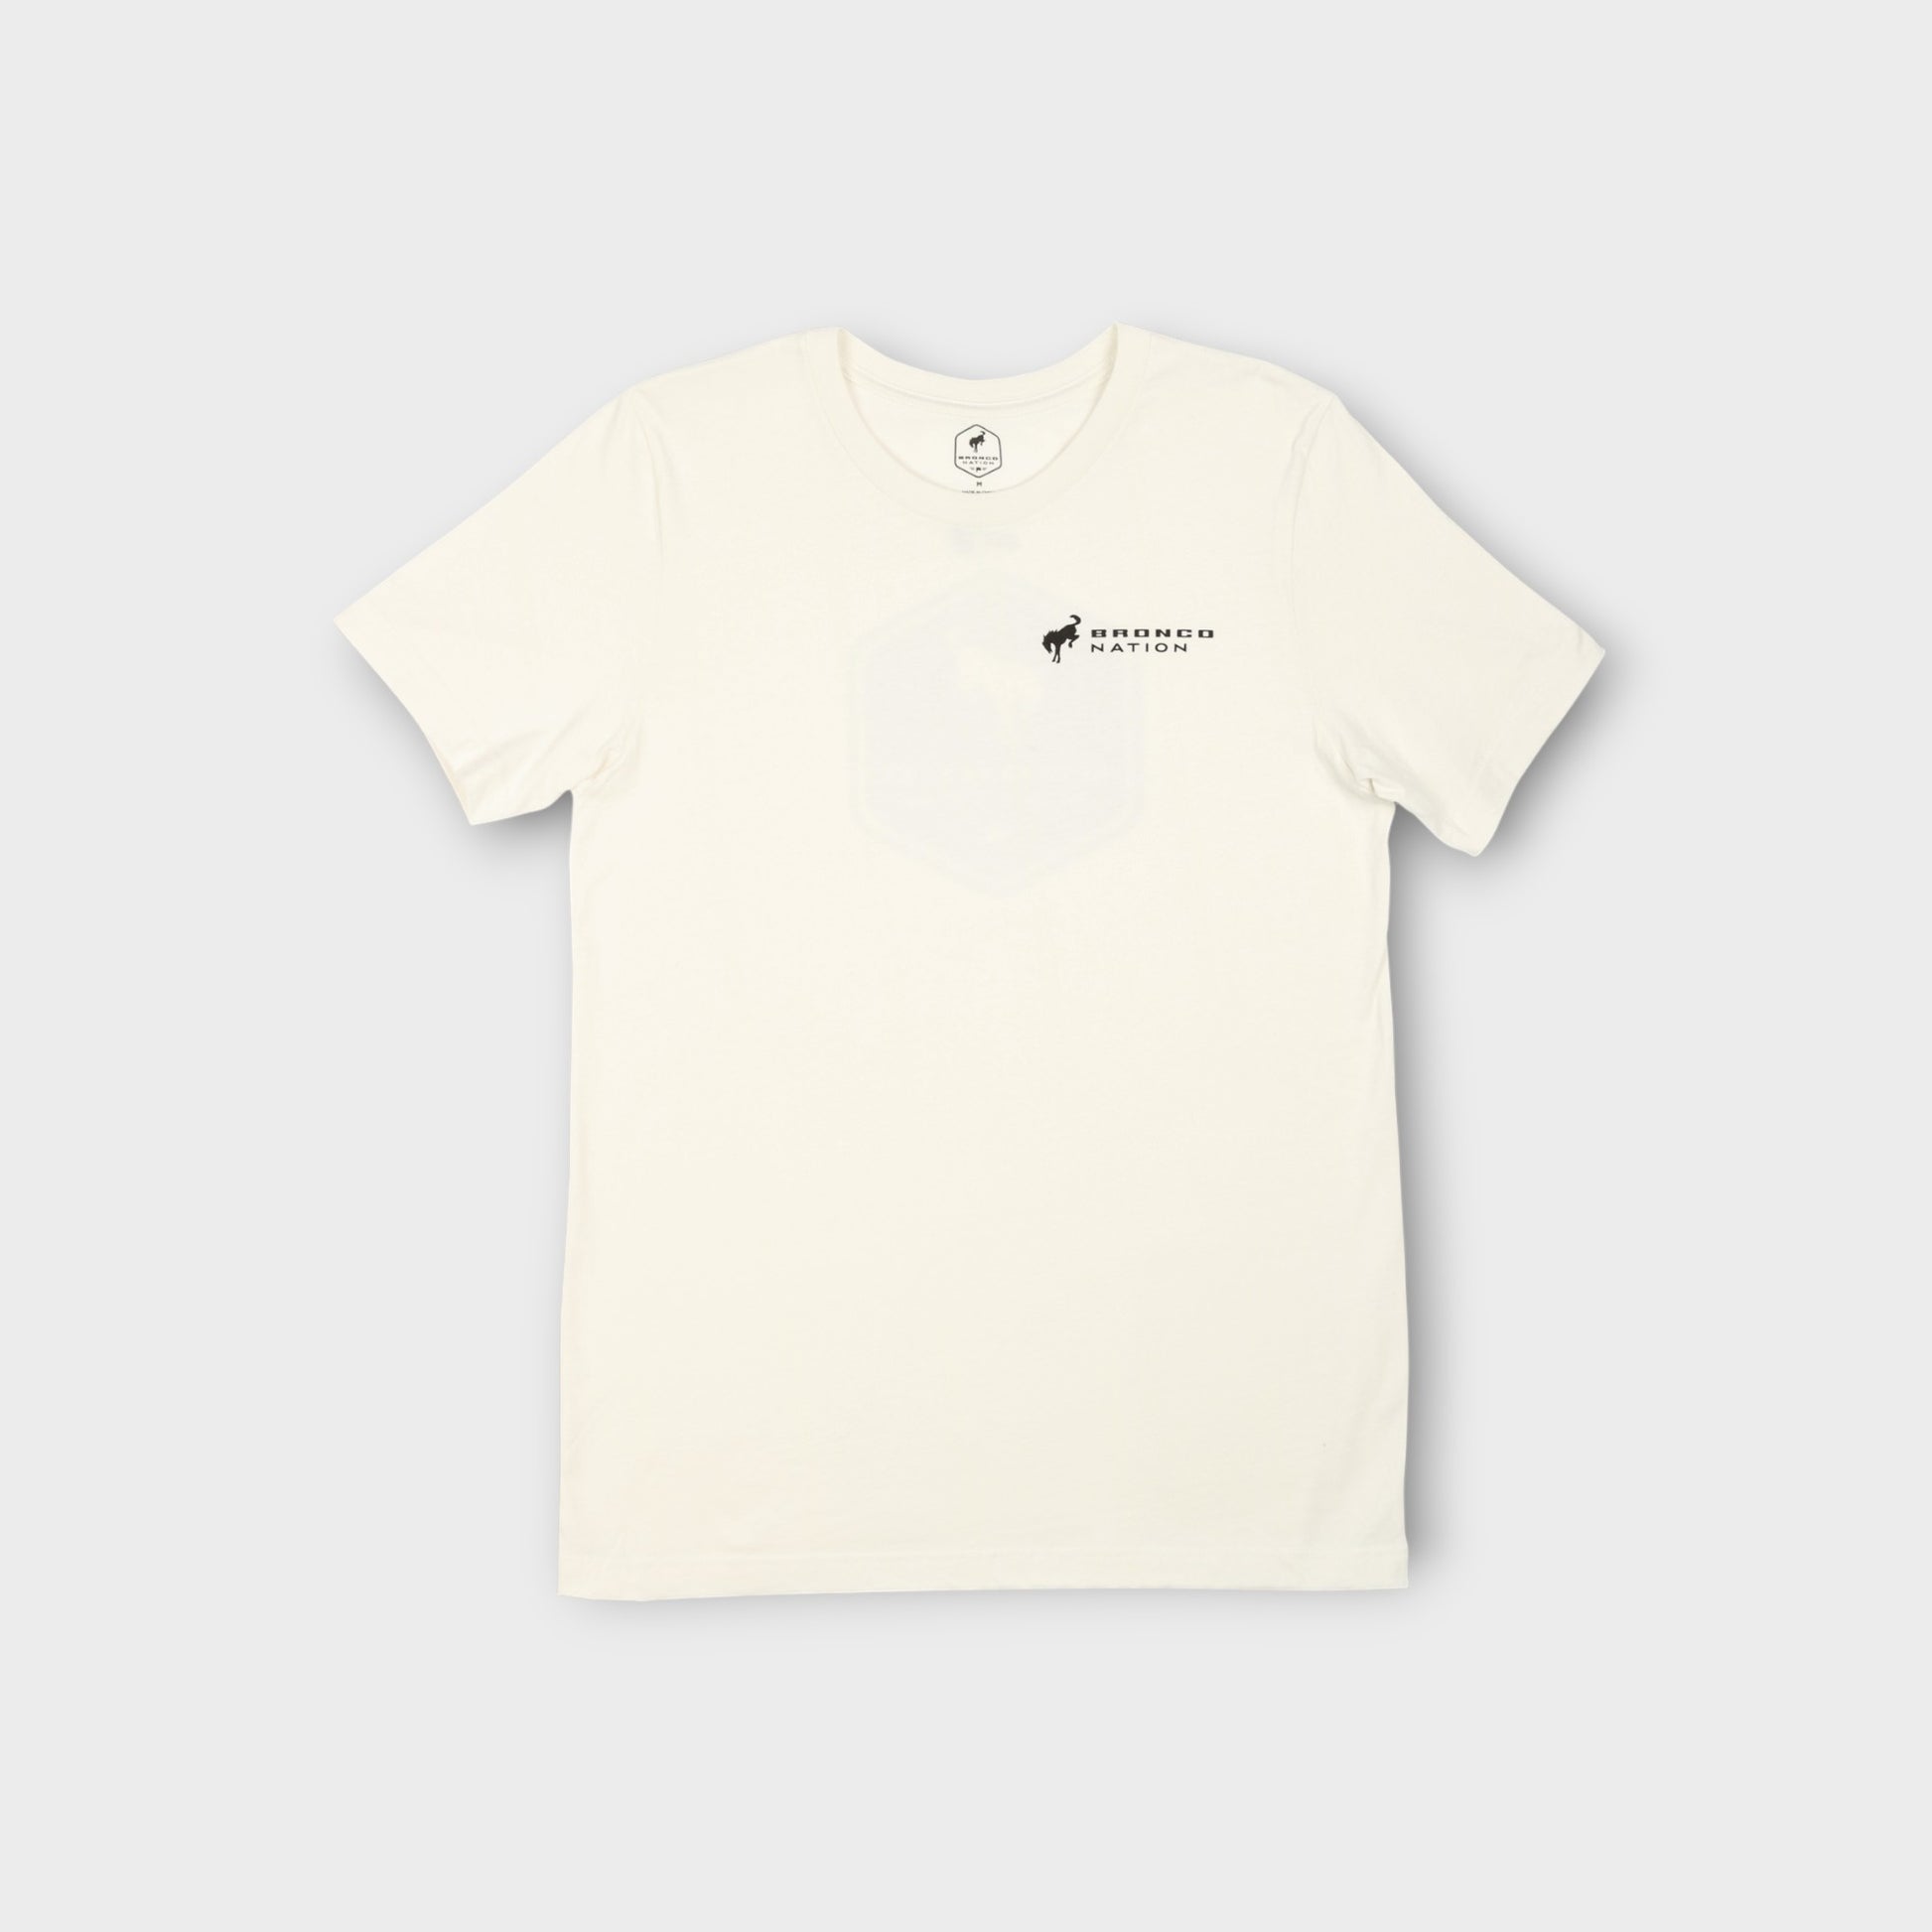 Standard Issue Tee- White Front